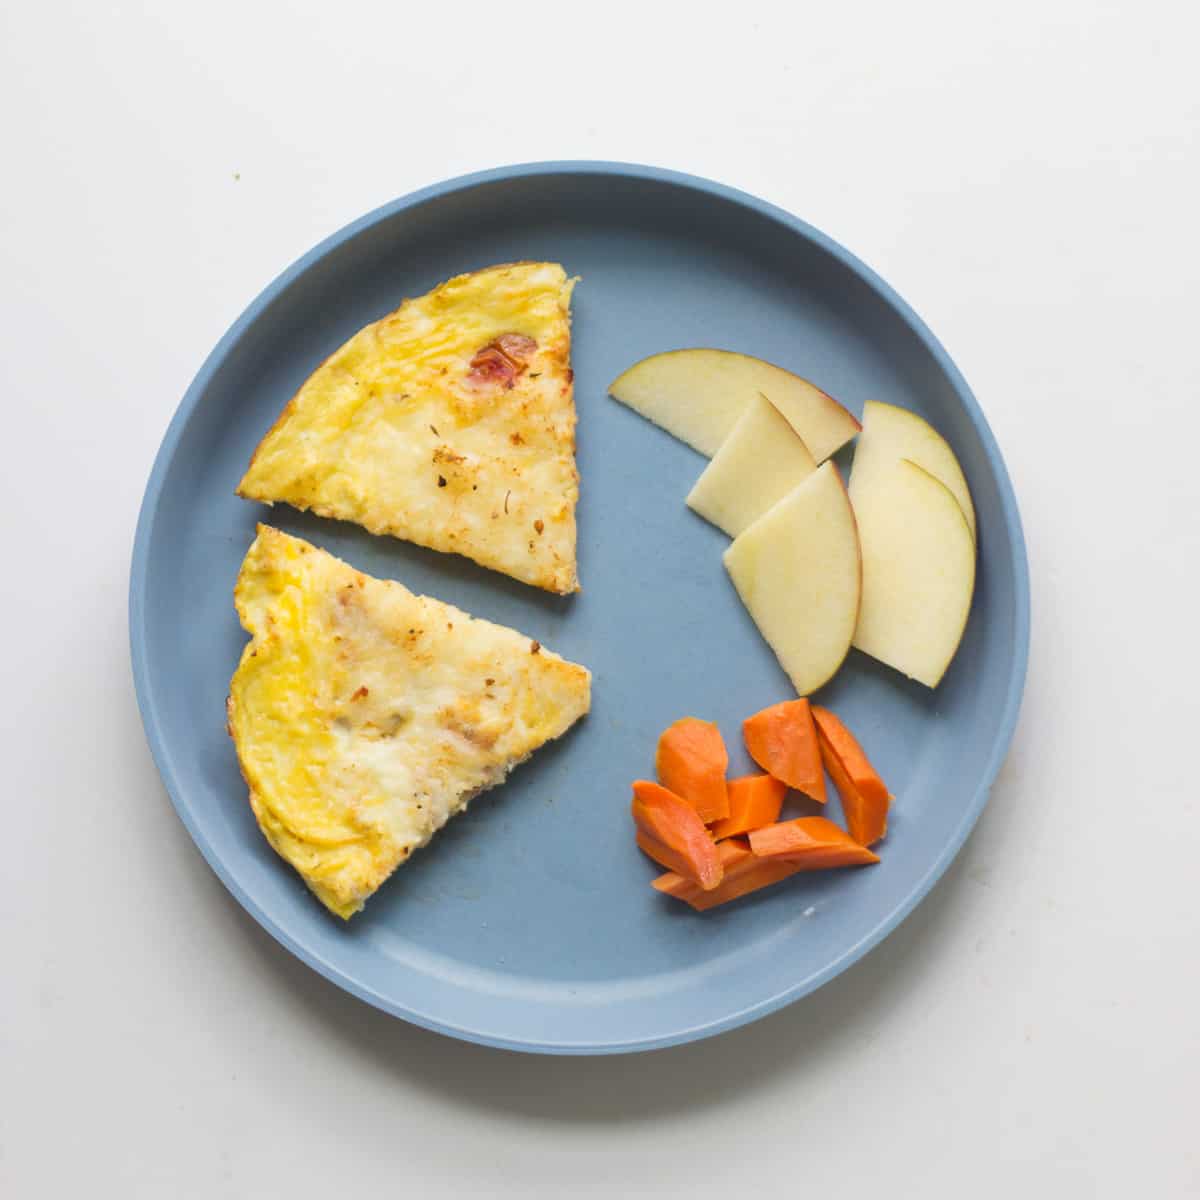 Two pizza egg slices with carrots and apples.